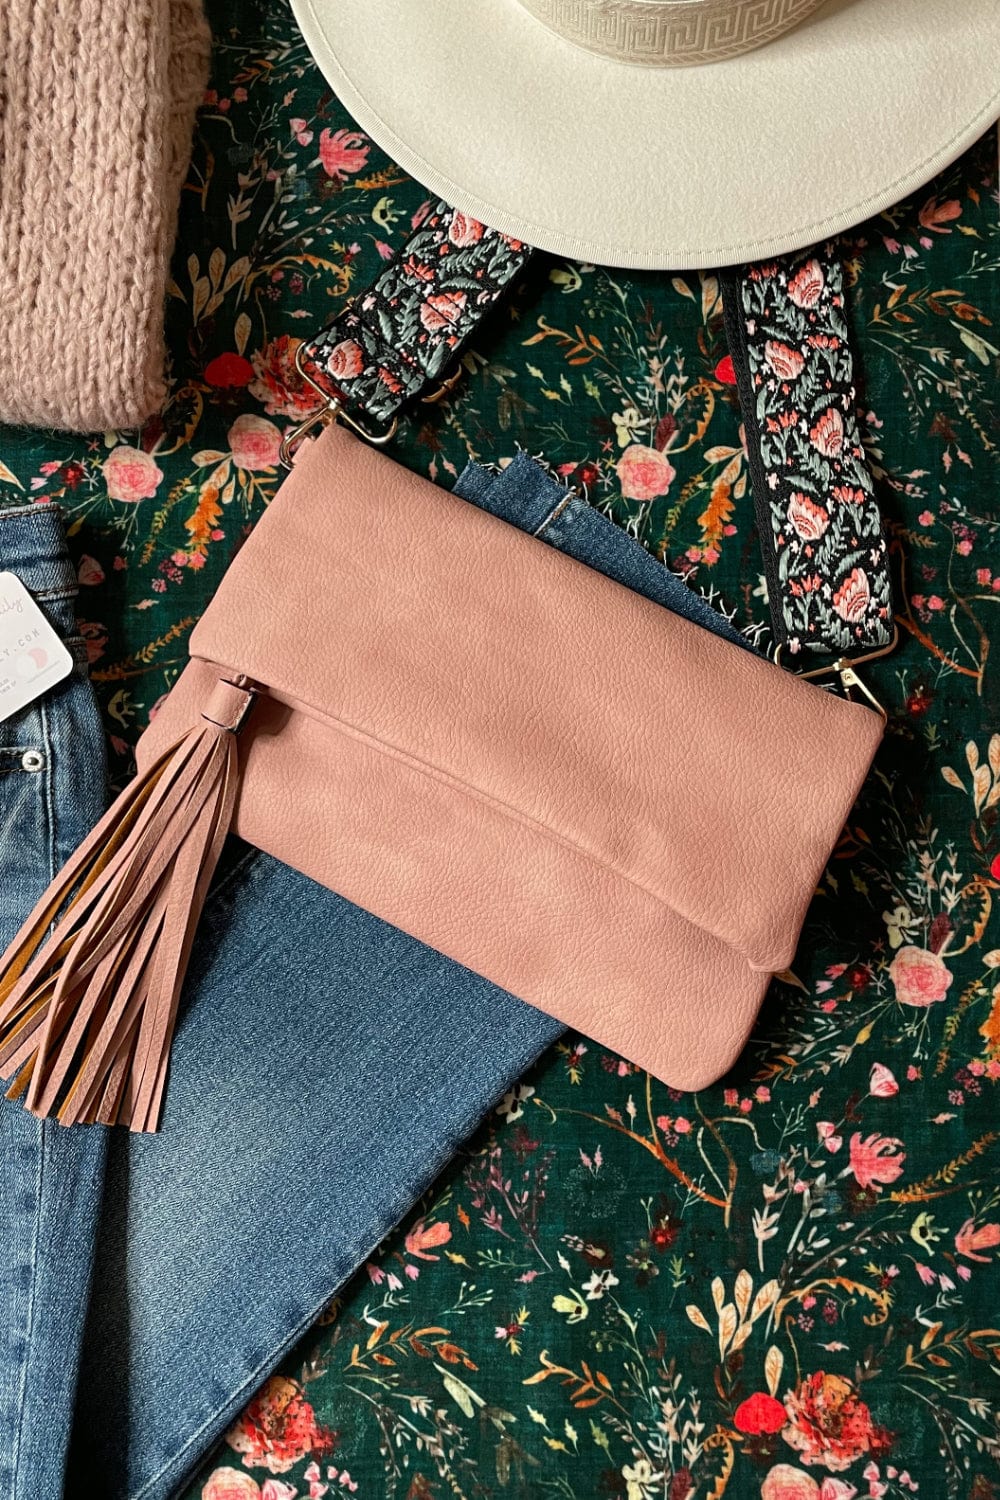 Told You So Folded Vegan Leather Crossbody Clutch Combo Bag - Accessories - Blooming Daily